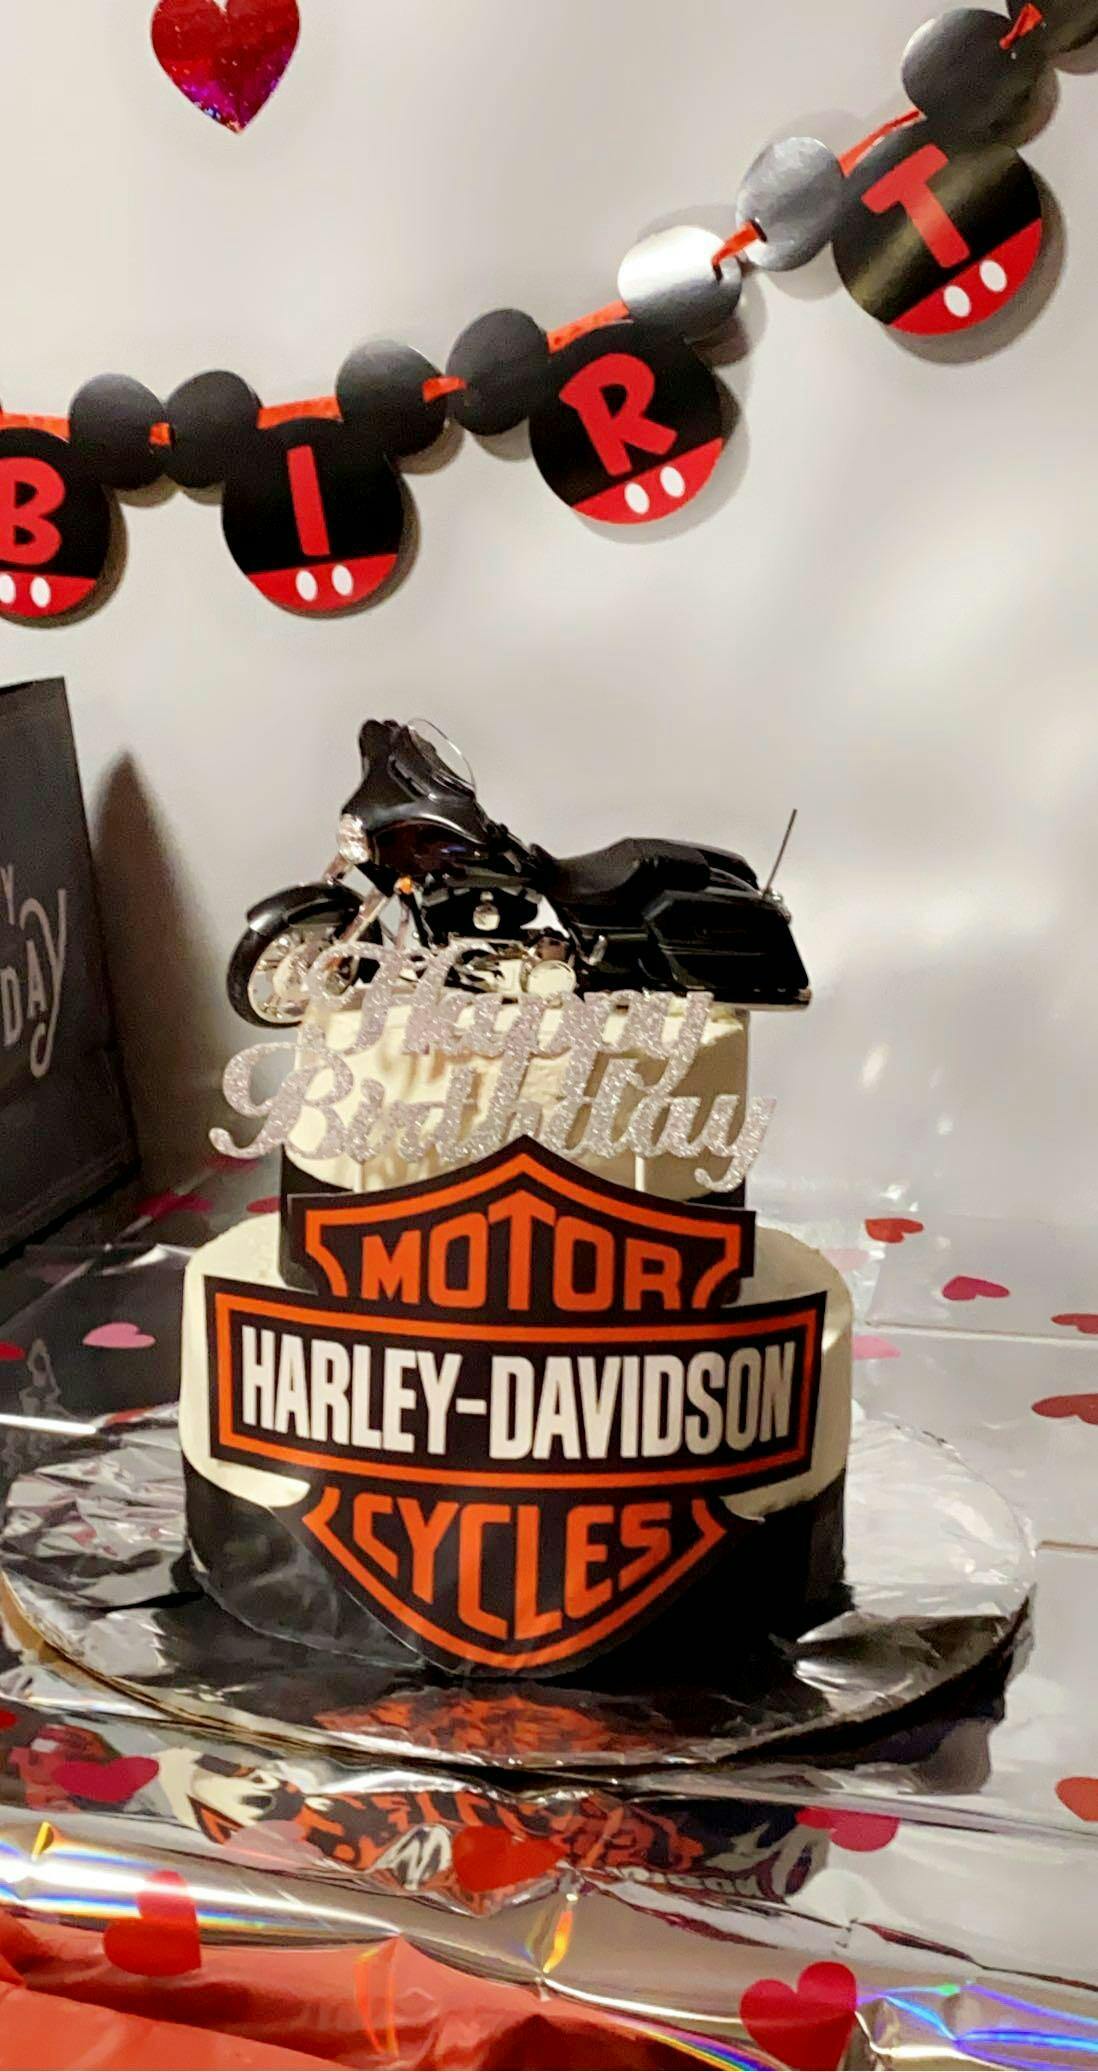 Motor Cycles Harley Davidson Logo Fire Background Edible Cake Topper Image Strips ABPID07165 